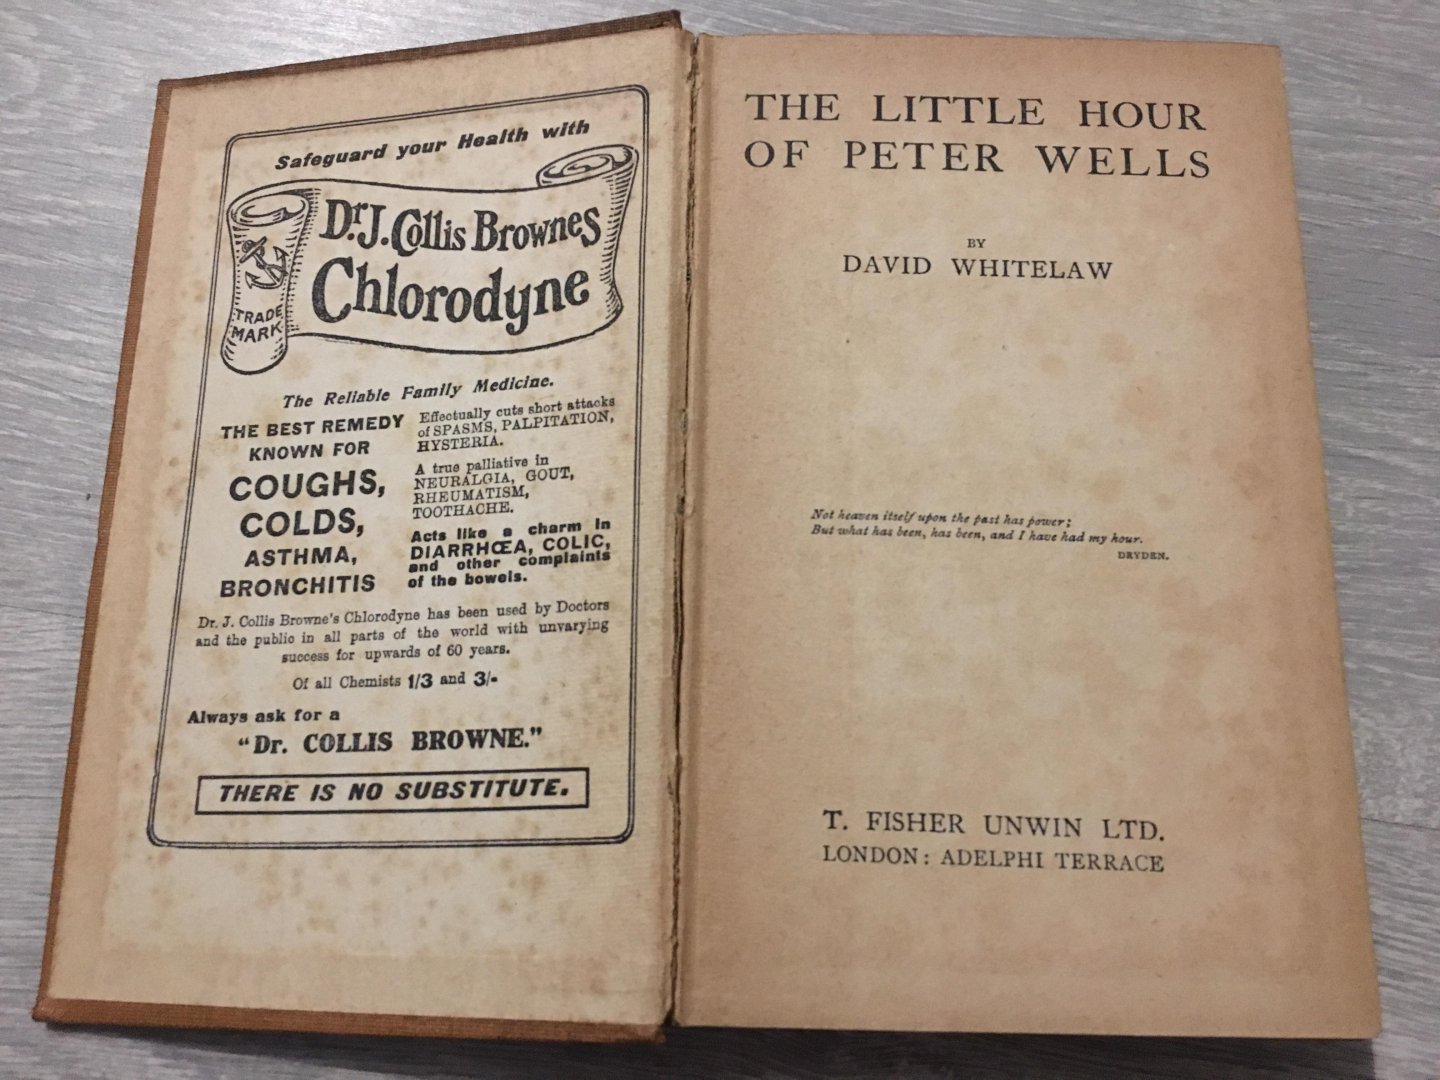 David whitelaw - the Little Hour of Peter Wells